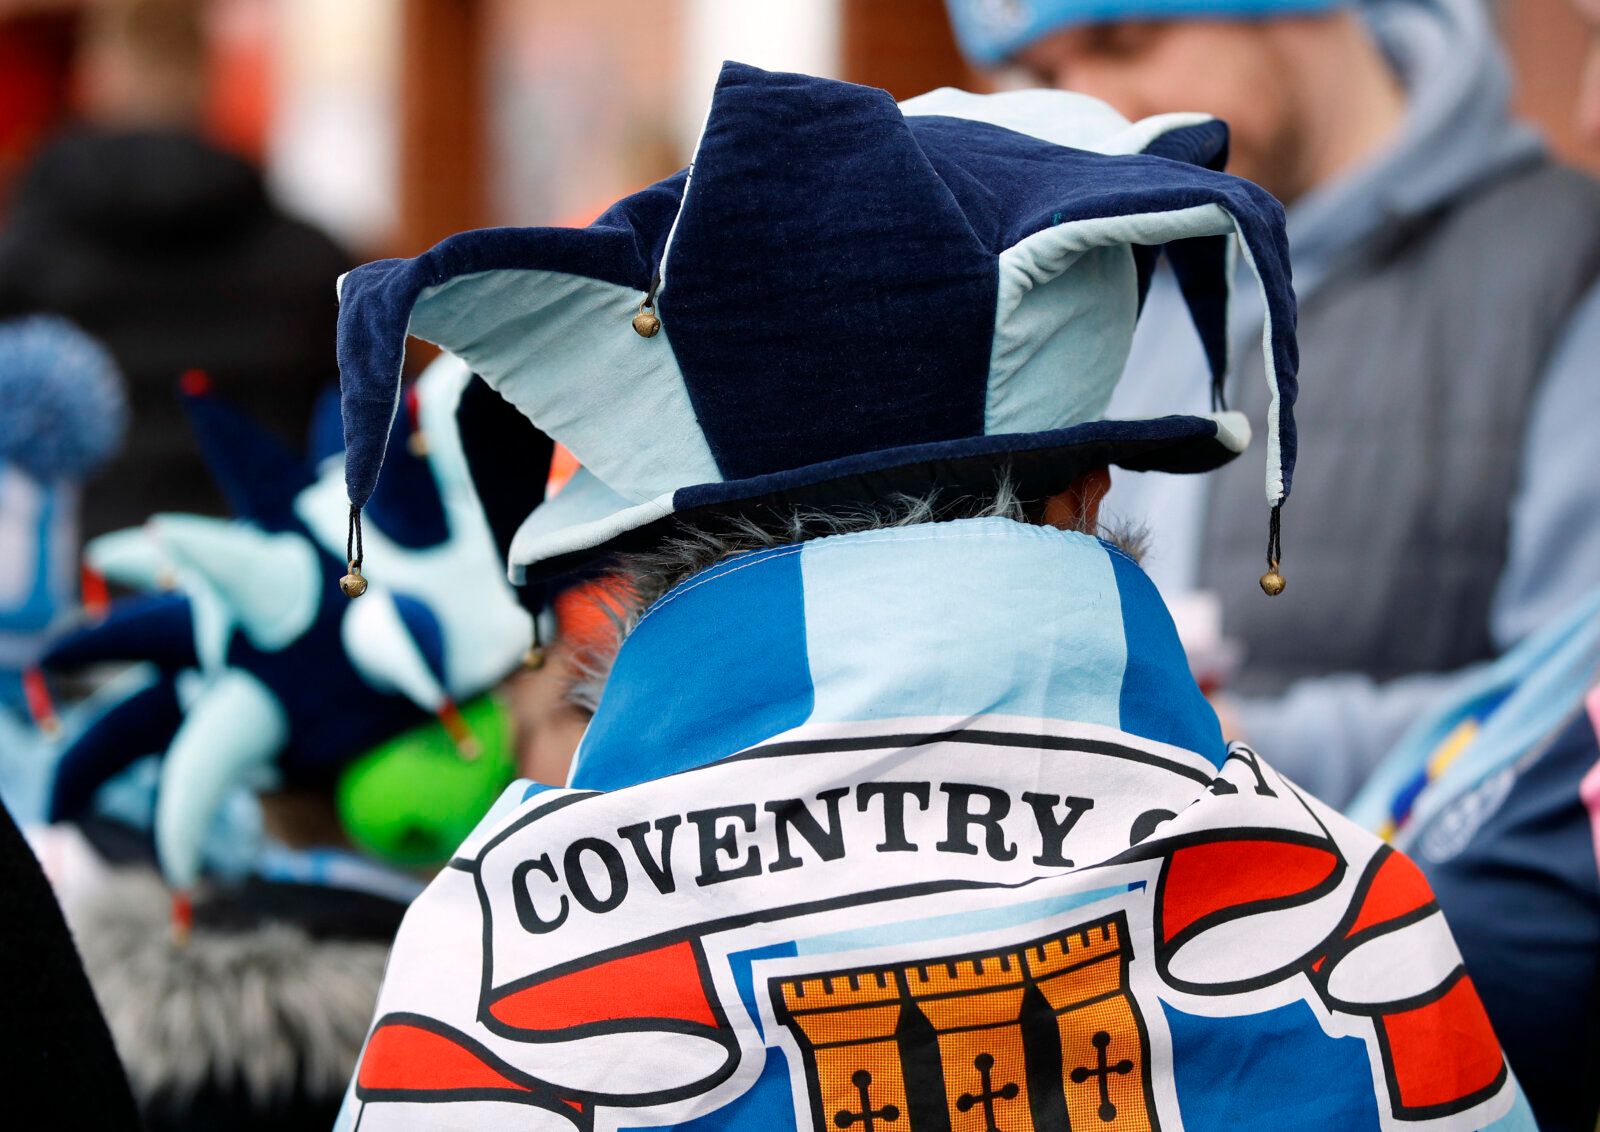 Soccer Football - FA Cup - Fourth Round - Southampton v Coventry City - St Mary's Stadium, Southampton, Britain - February 5, 2022 Coventry City fan before the match REUTERS/Peter Nicholls